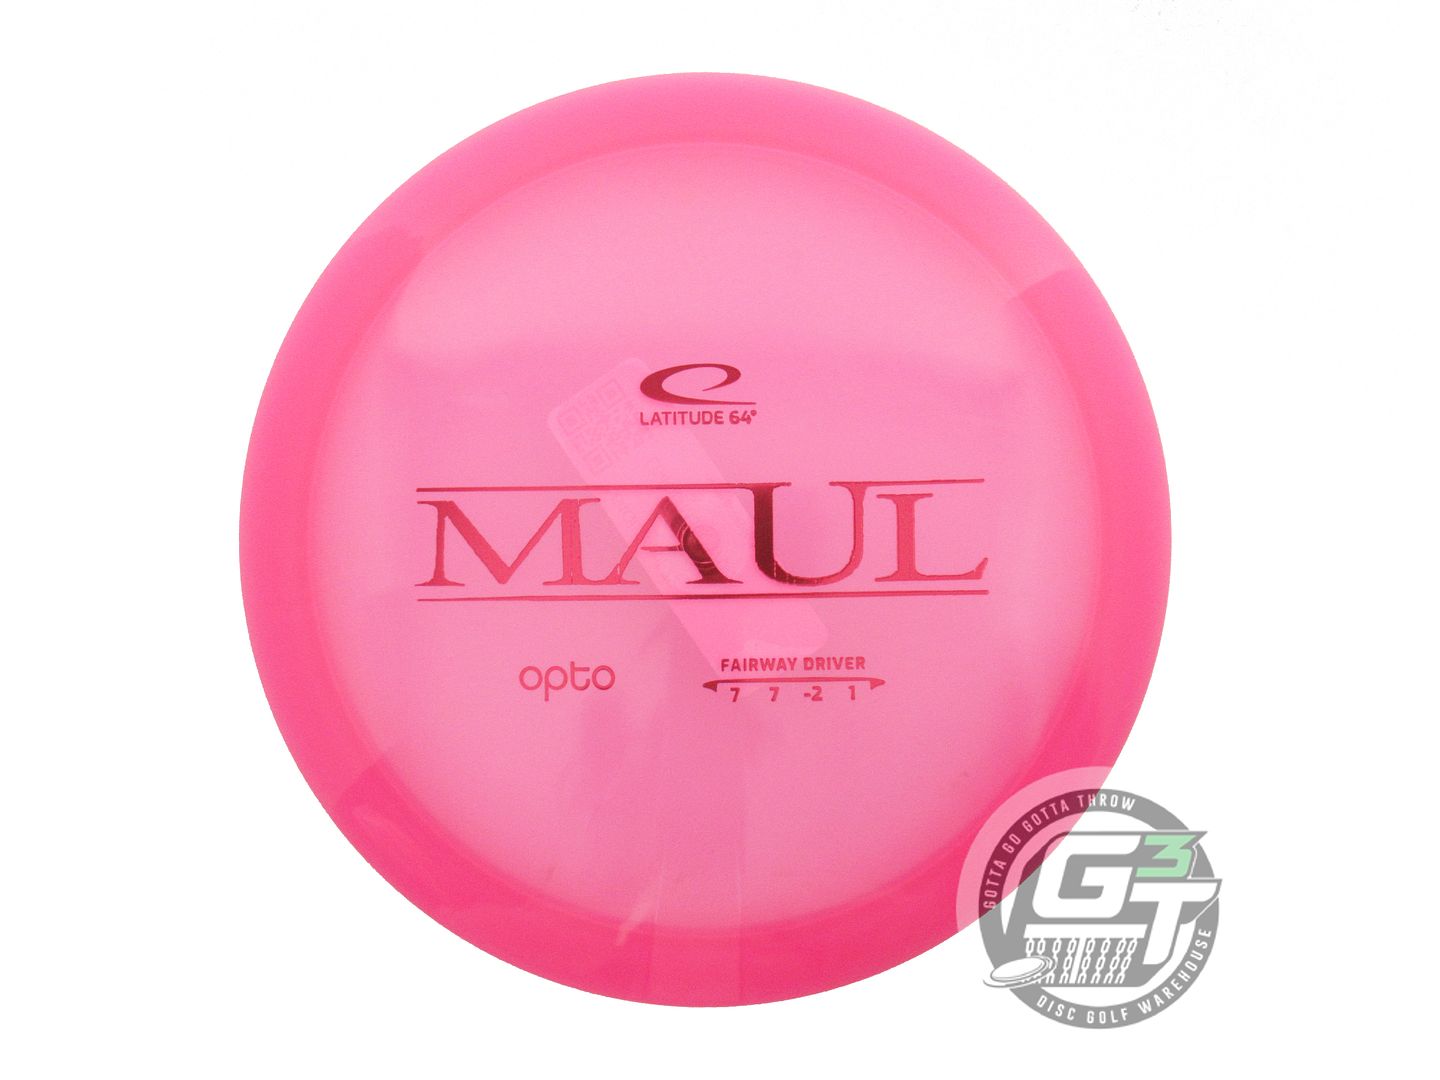 Latitude 64 Opto Line Maul Fairway Driver Golf Disc (Individually Listed)